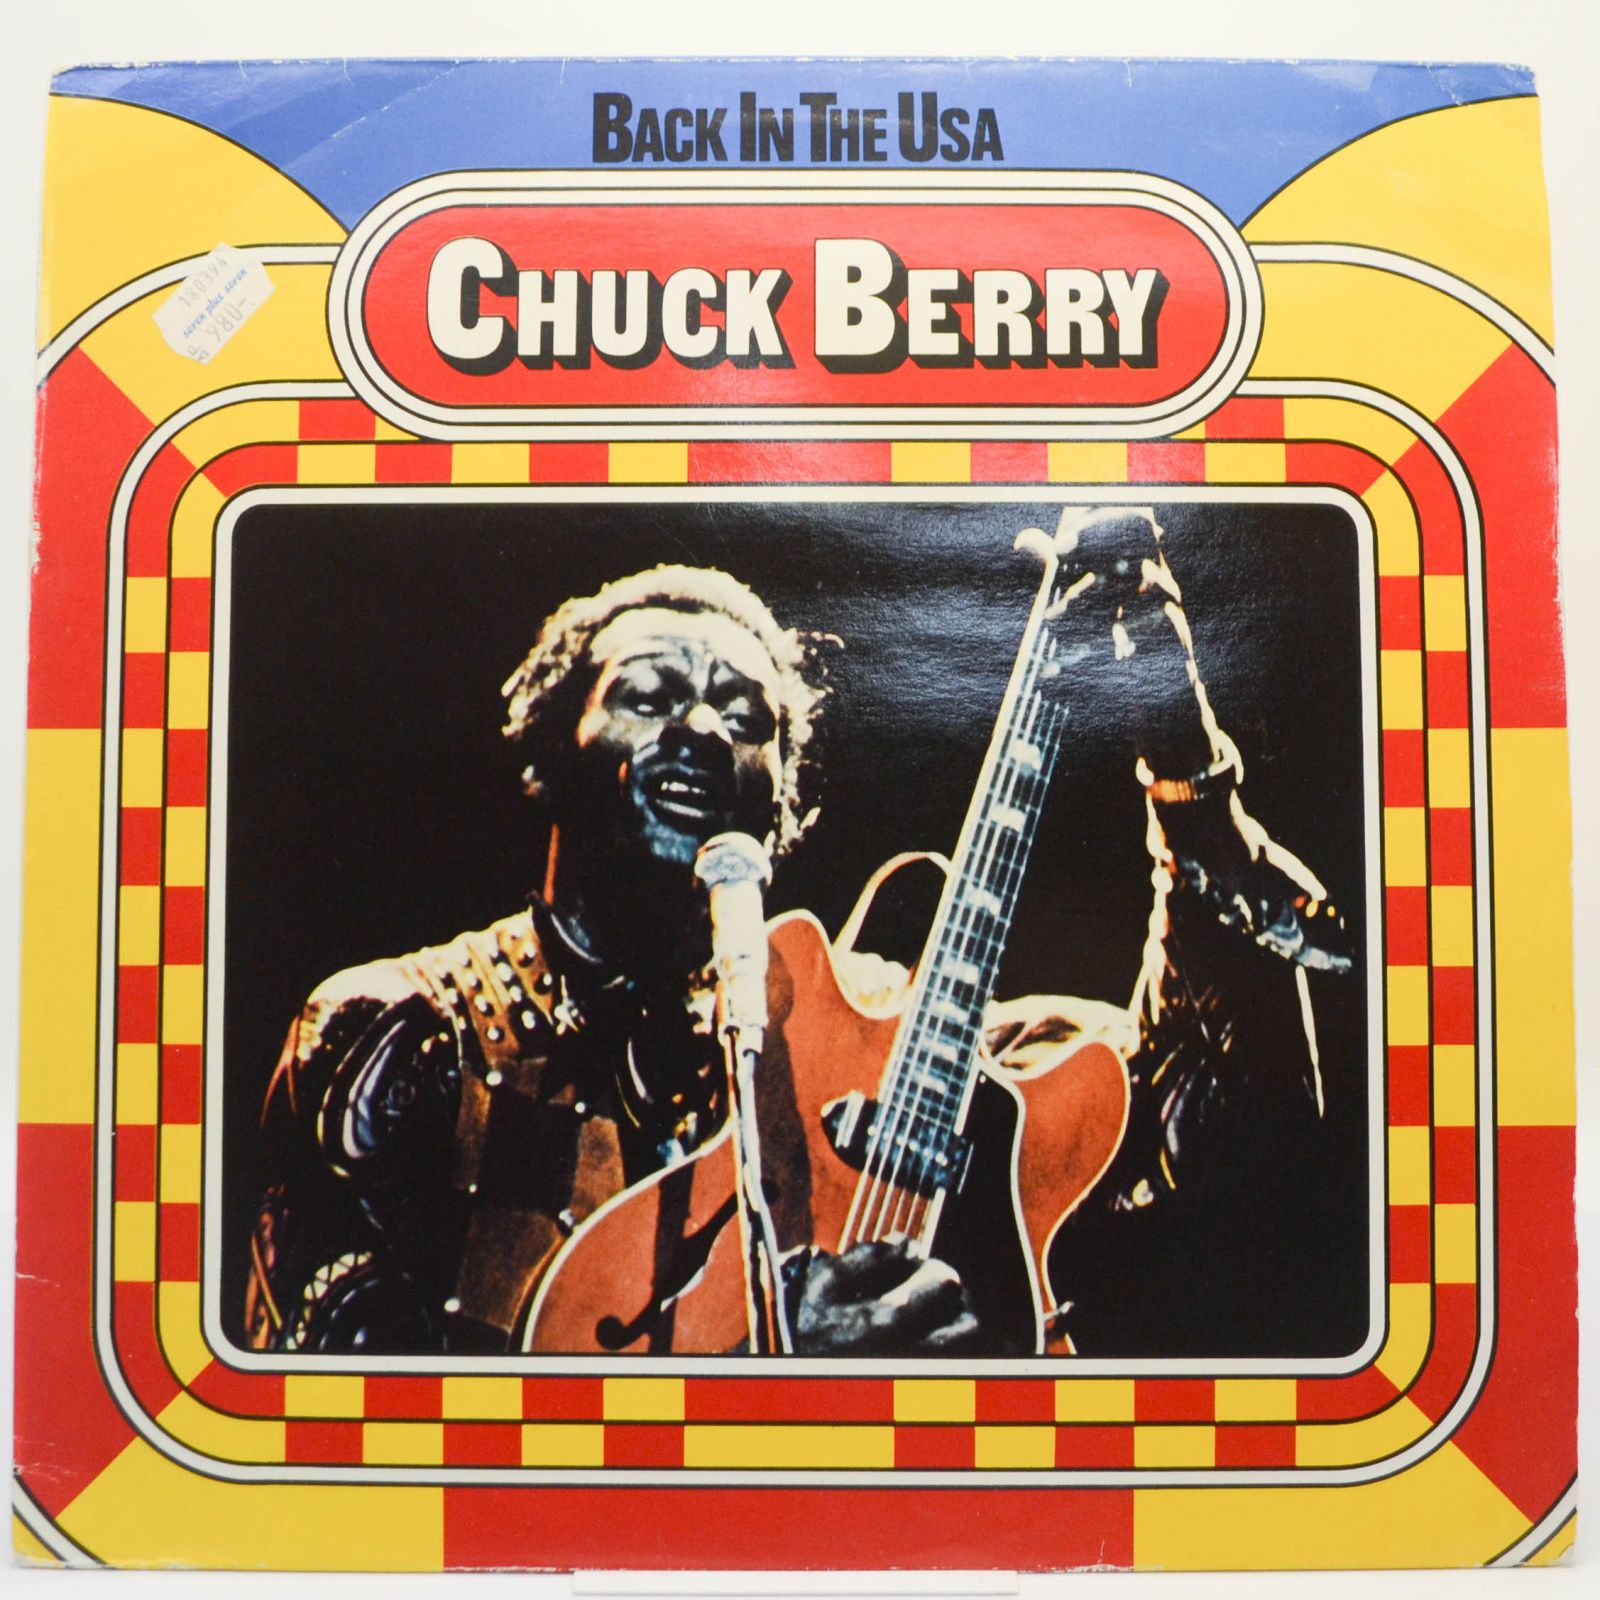 Chuck Berry — Back In The USA, 1983